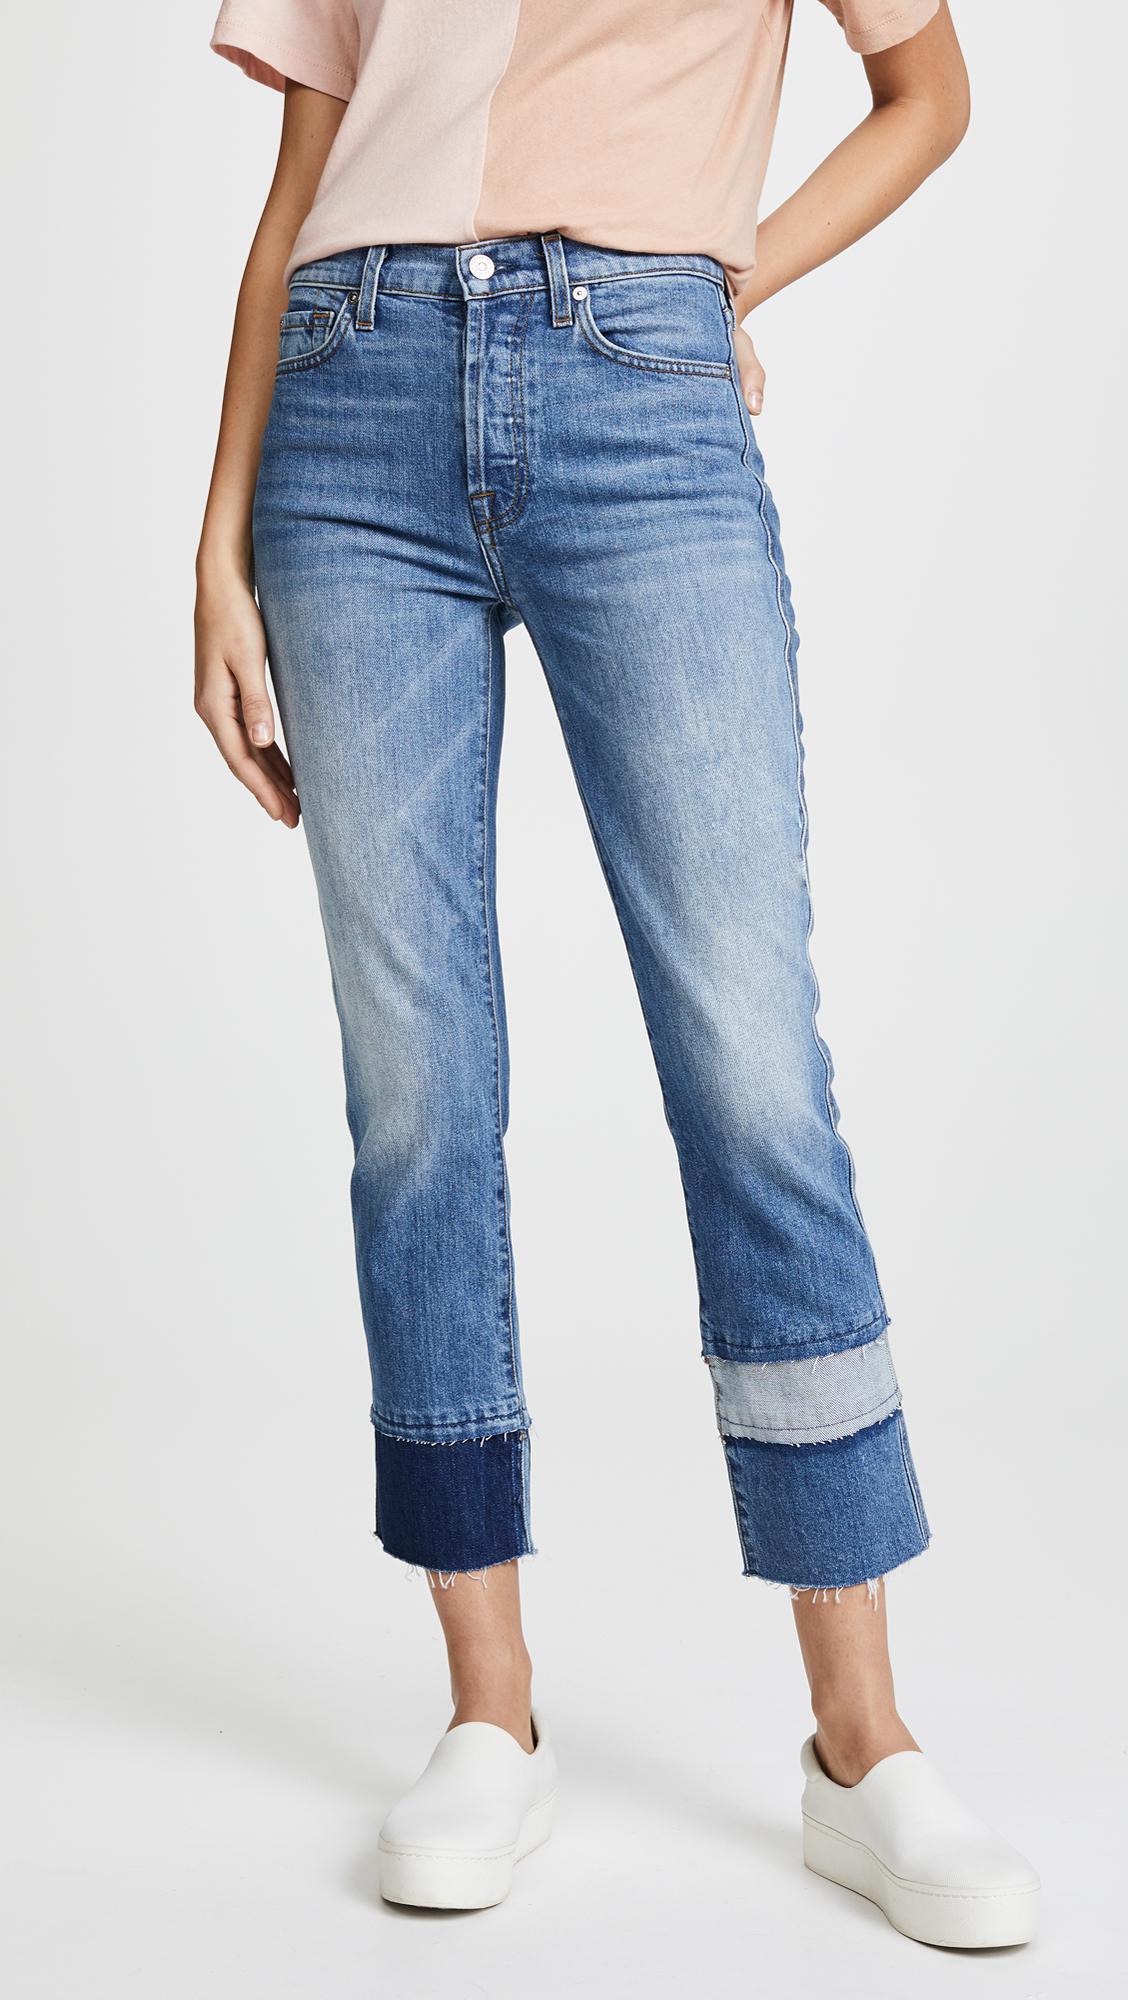 7 All Mankind Fray Cuff Jeans in Blue Lyst